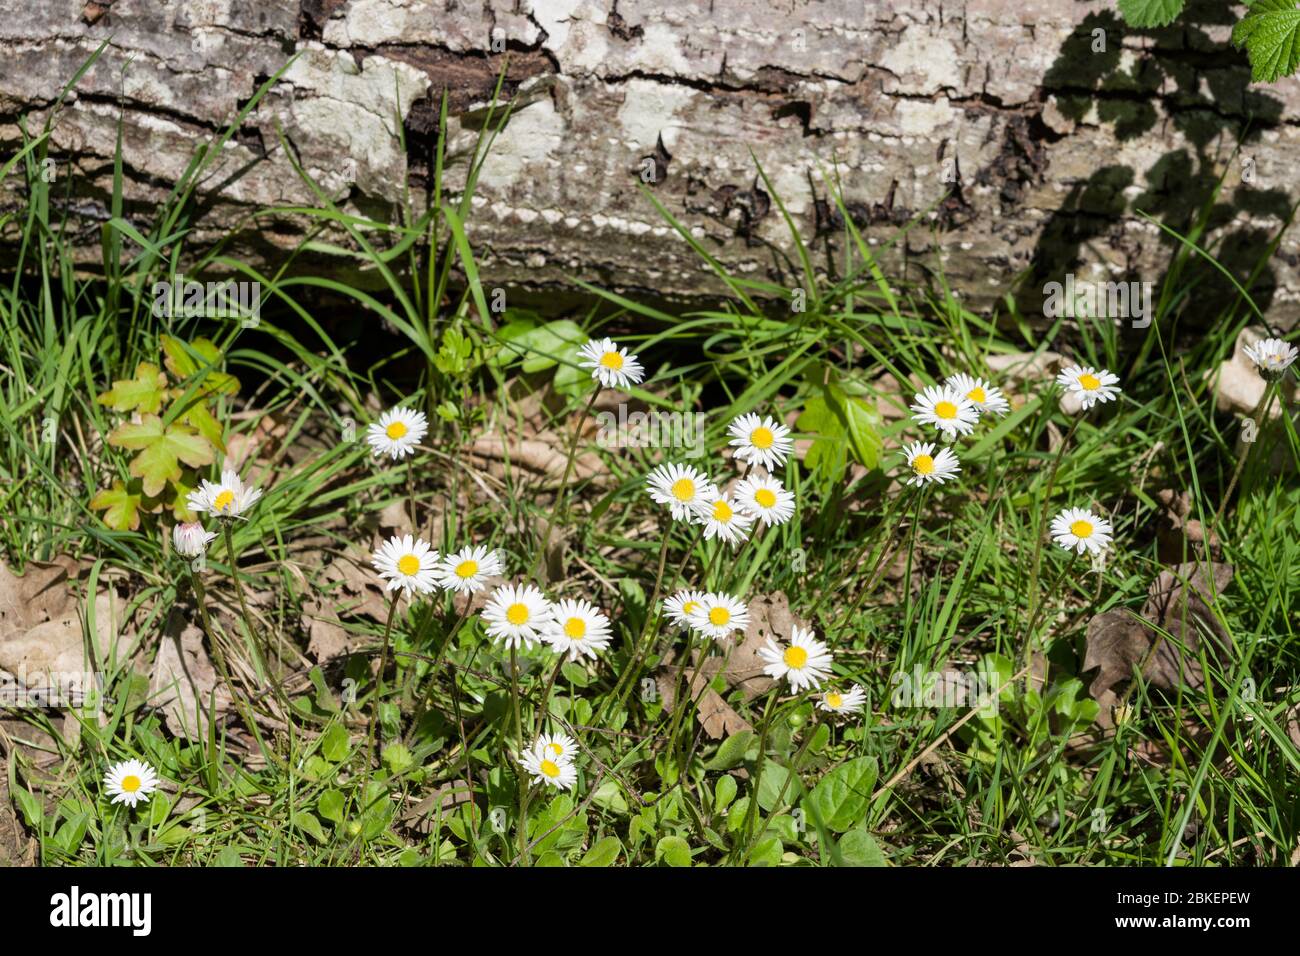 Patch of common daisies, Bellis perennis, in a woodland glade with a fallen tree in the background, UK Stock Photo